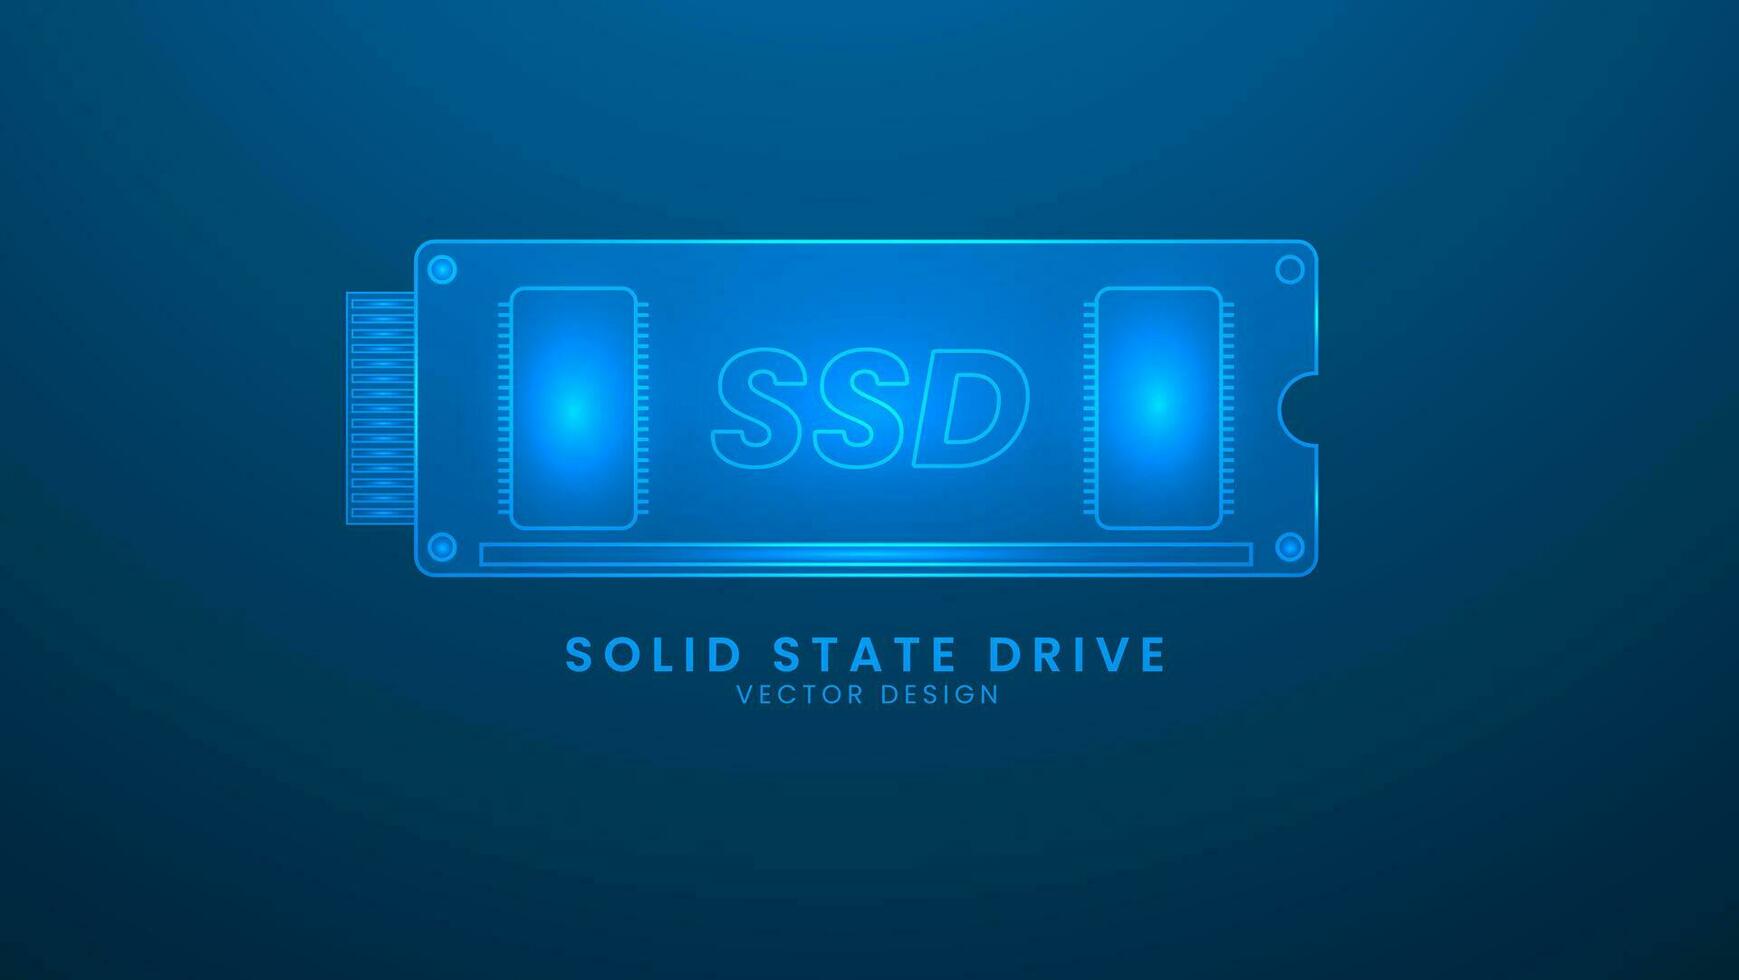 Solid State Drive computer memory. Vector illustration with light effect and neon